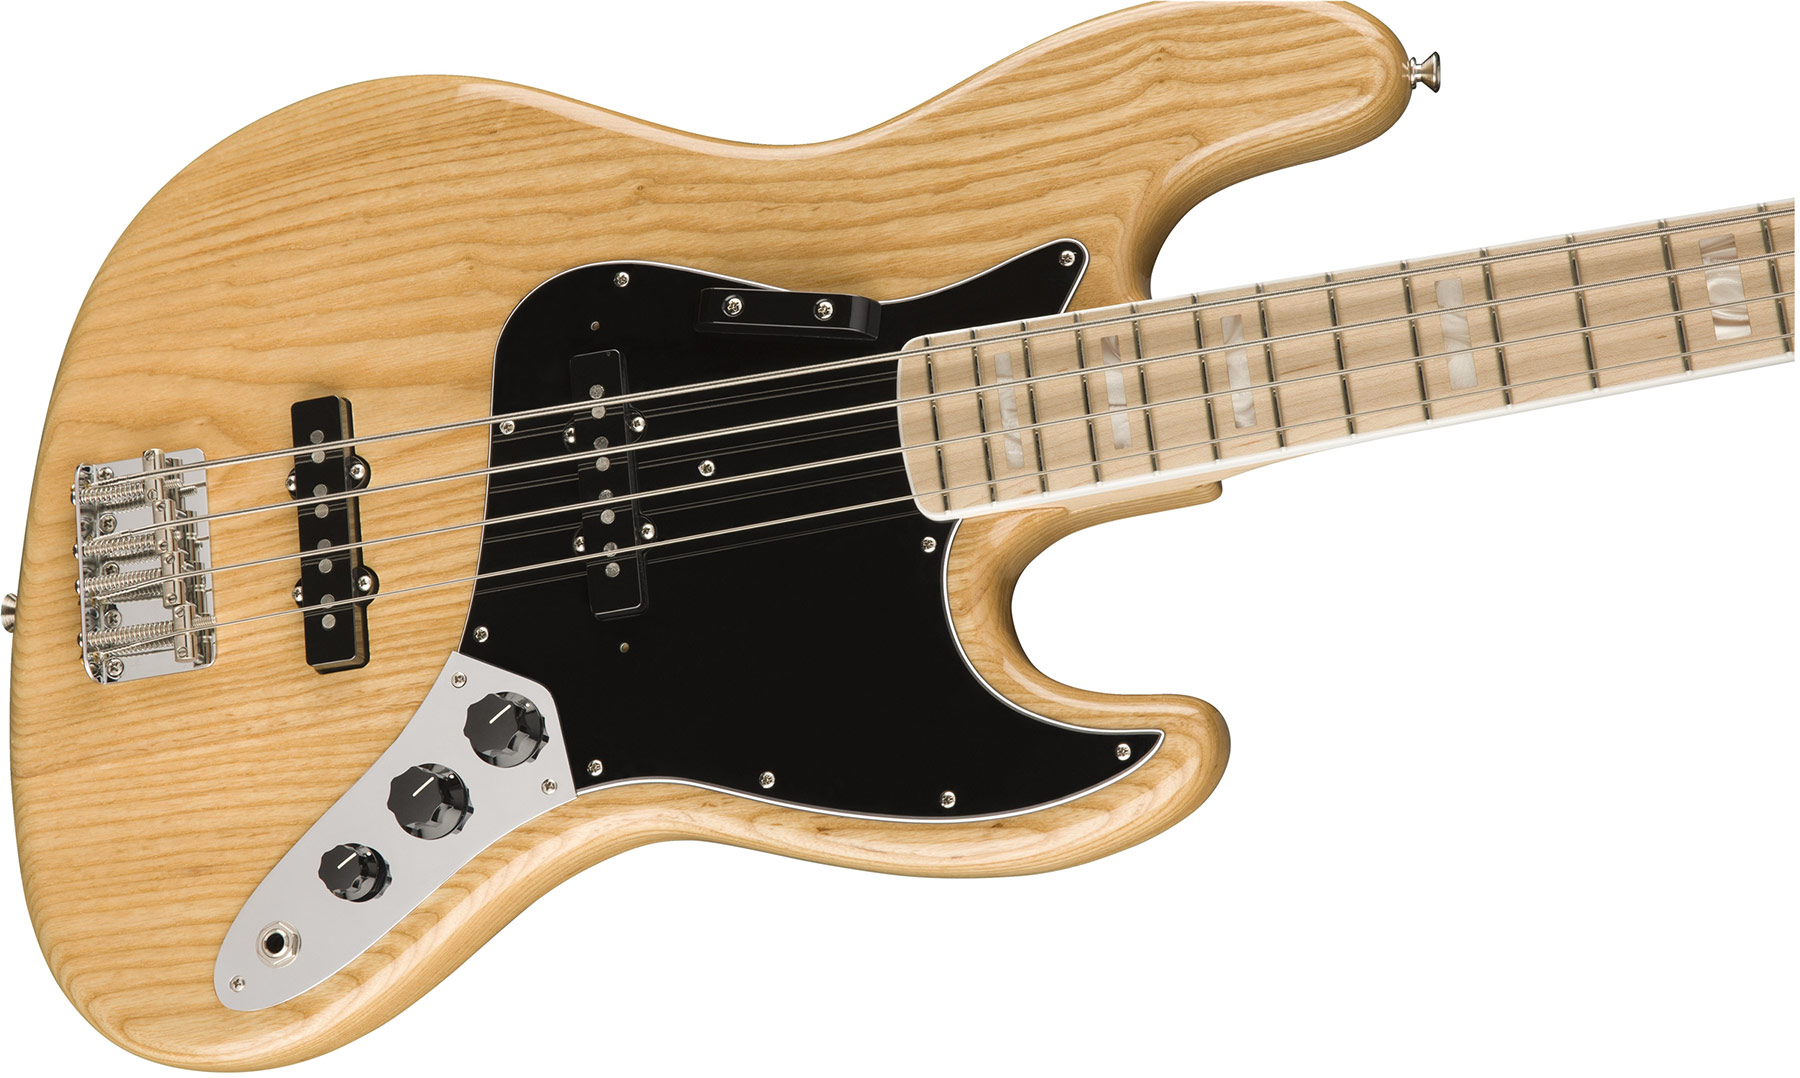 Fender Jazz Bass '70s American Original Usa Mn - Natural - Solid body electric bass - Variation 4